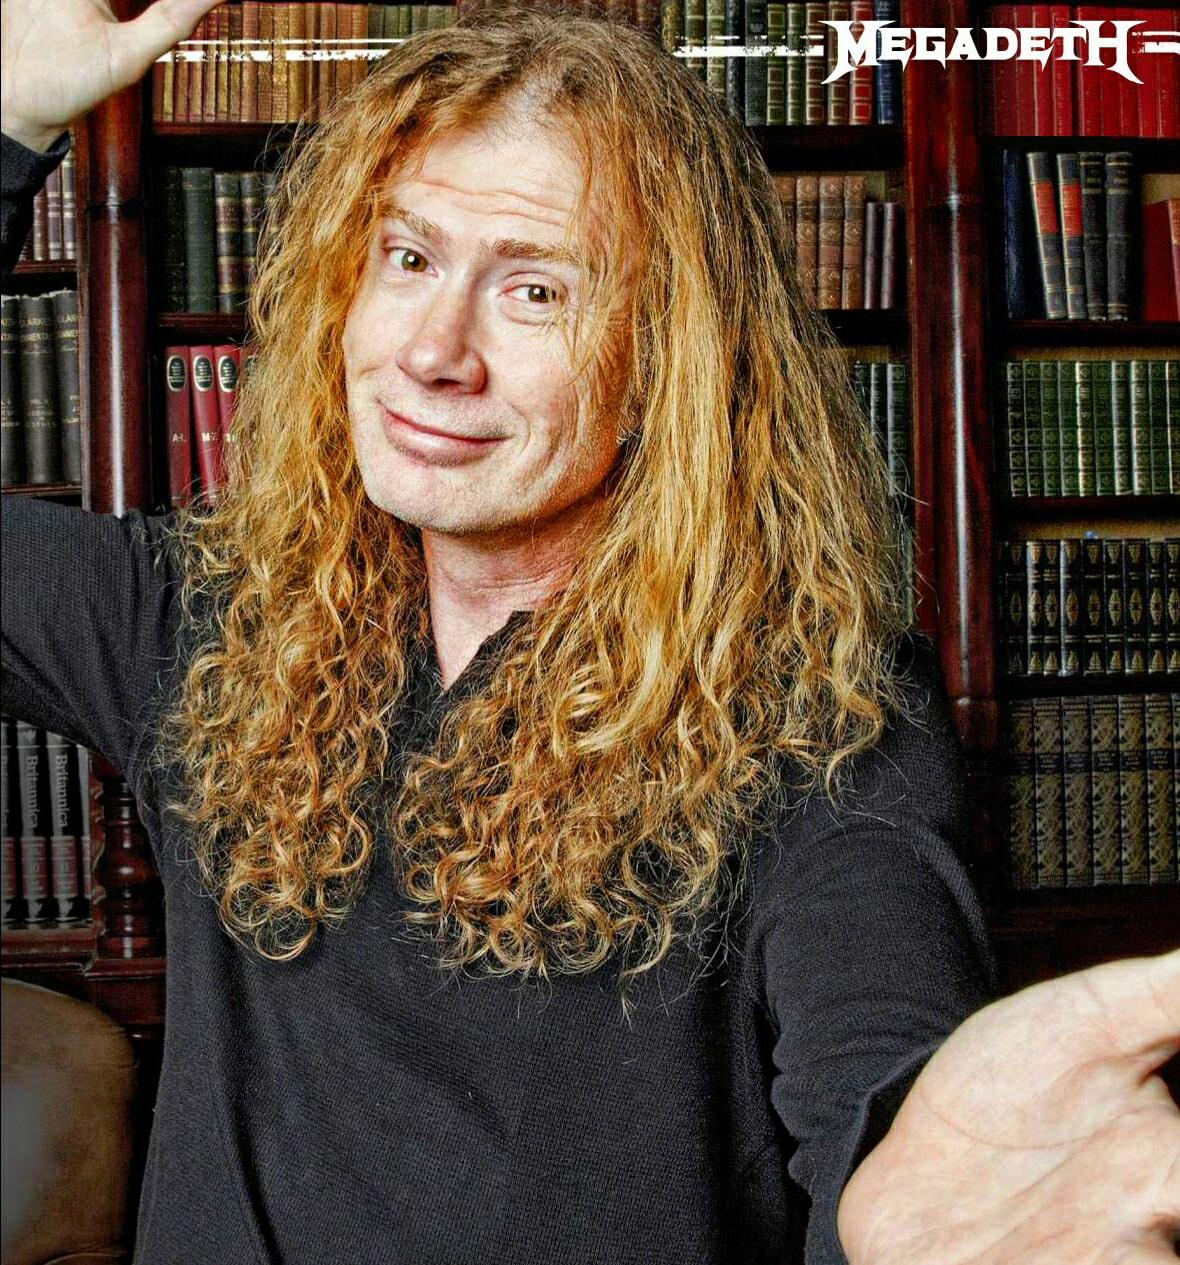 Dave Mustaine on Twitter: 